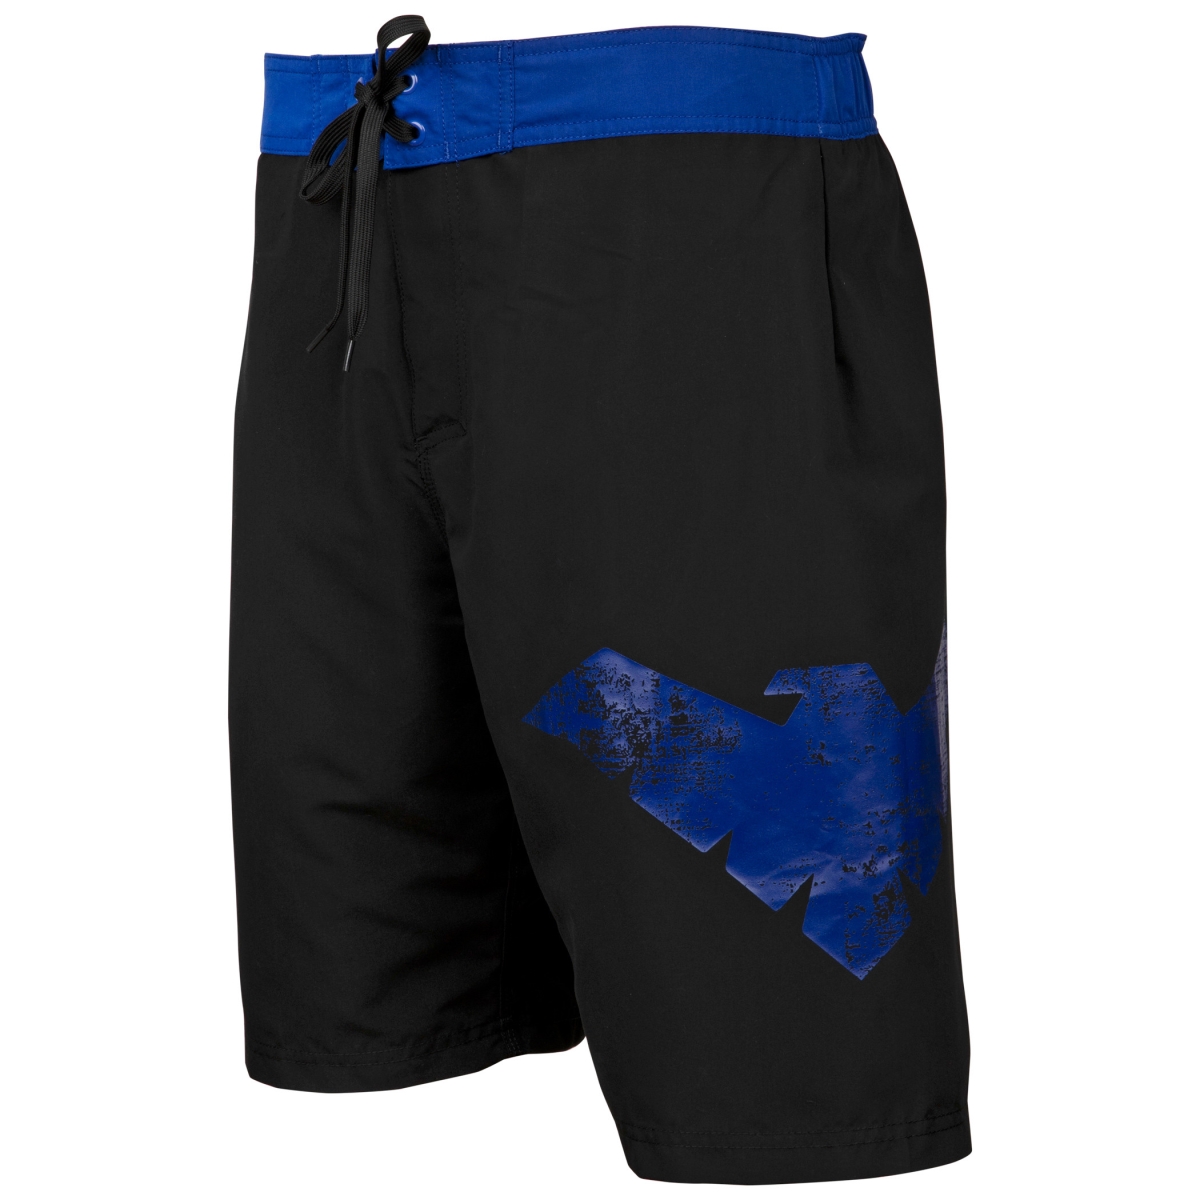 Picture of Nightwing 803533-xlarge 40-42 Nightwing Symbol Board Shorts, Heather Black - Extra Large 40-42